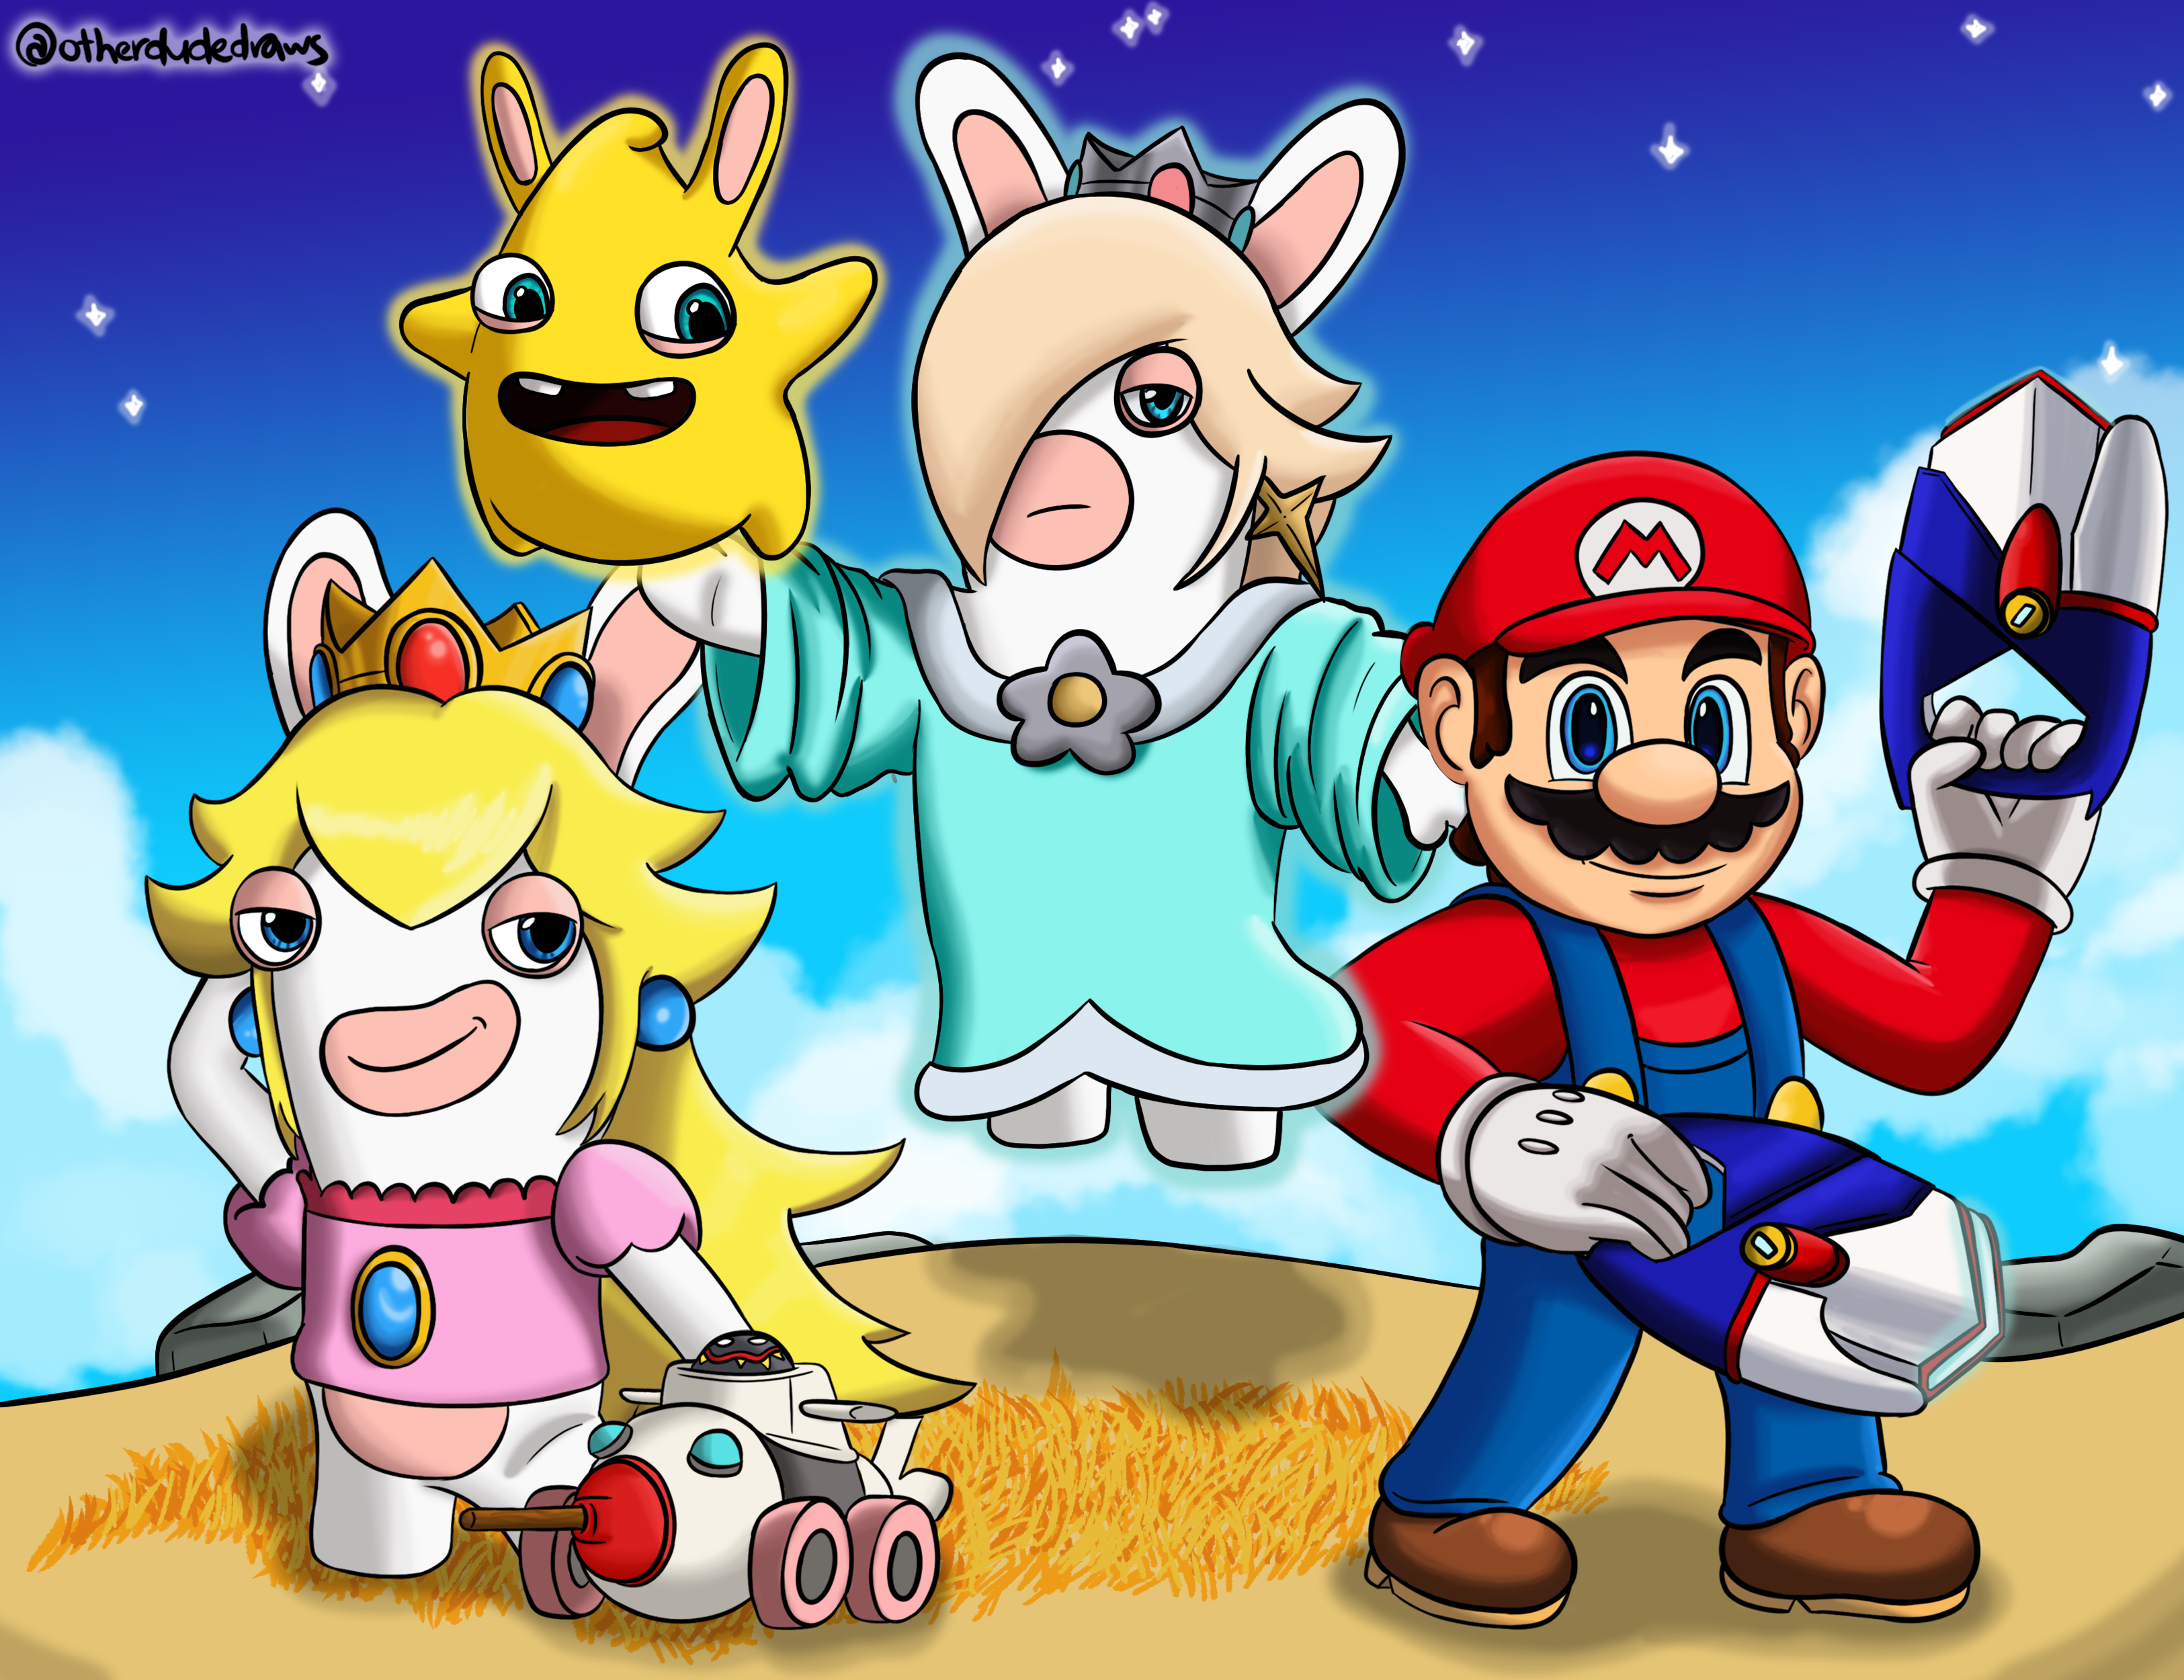 Mario+Rabbids: Sparks of Hope by otherdudeartist on DeviantArt